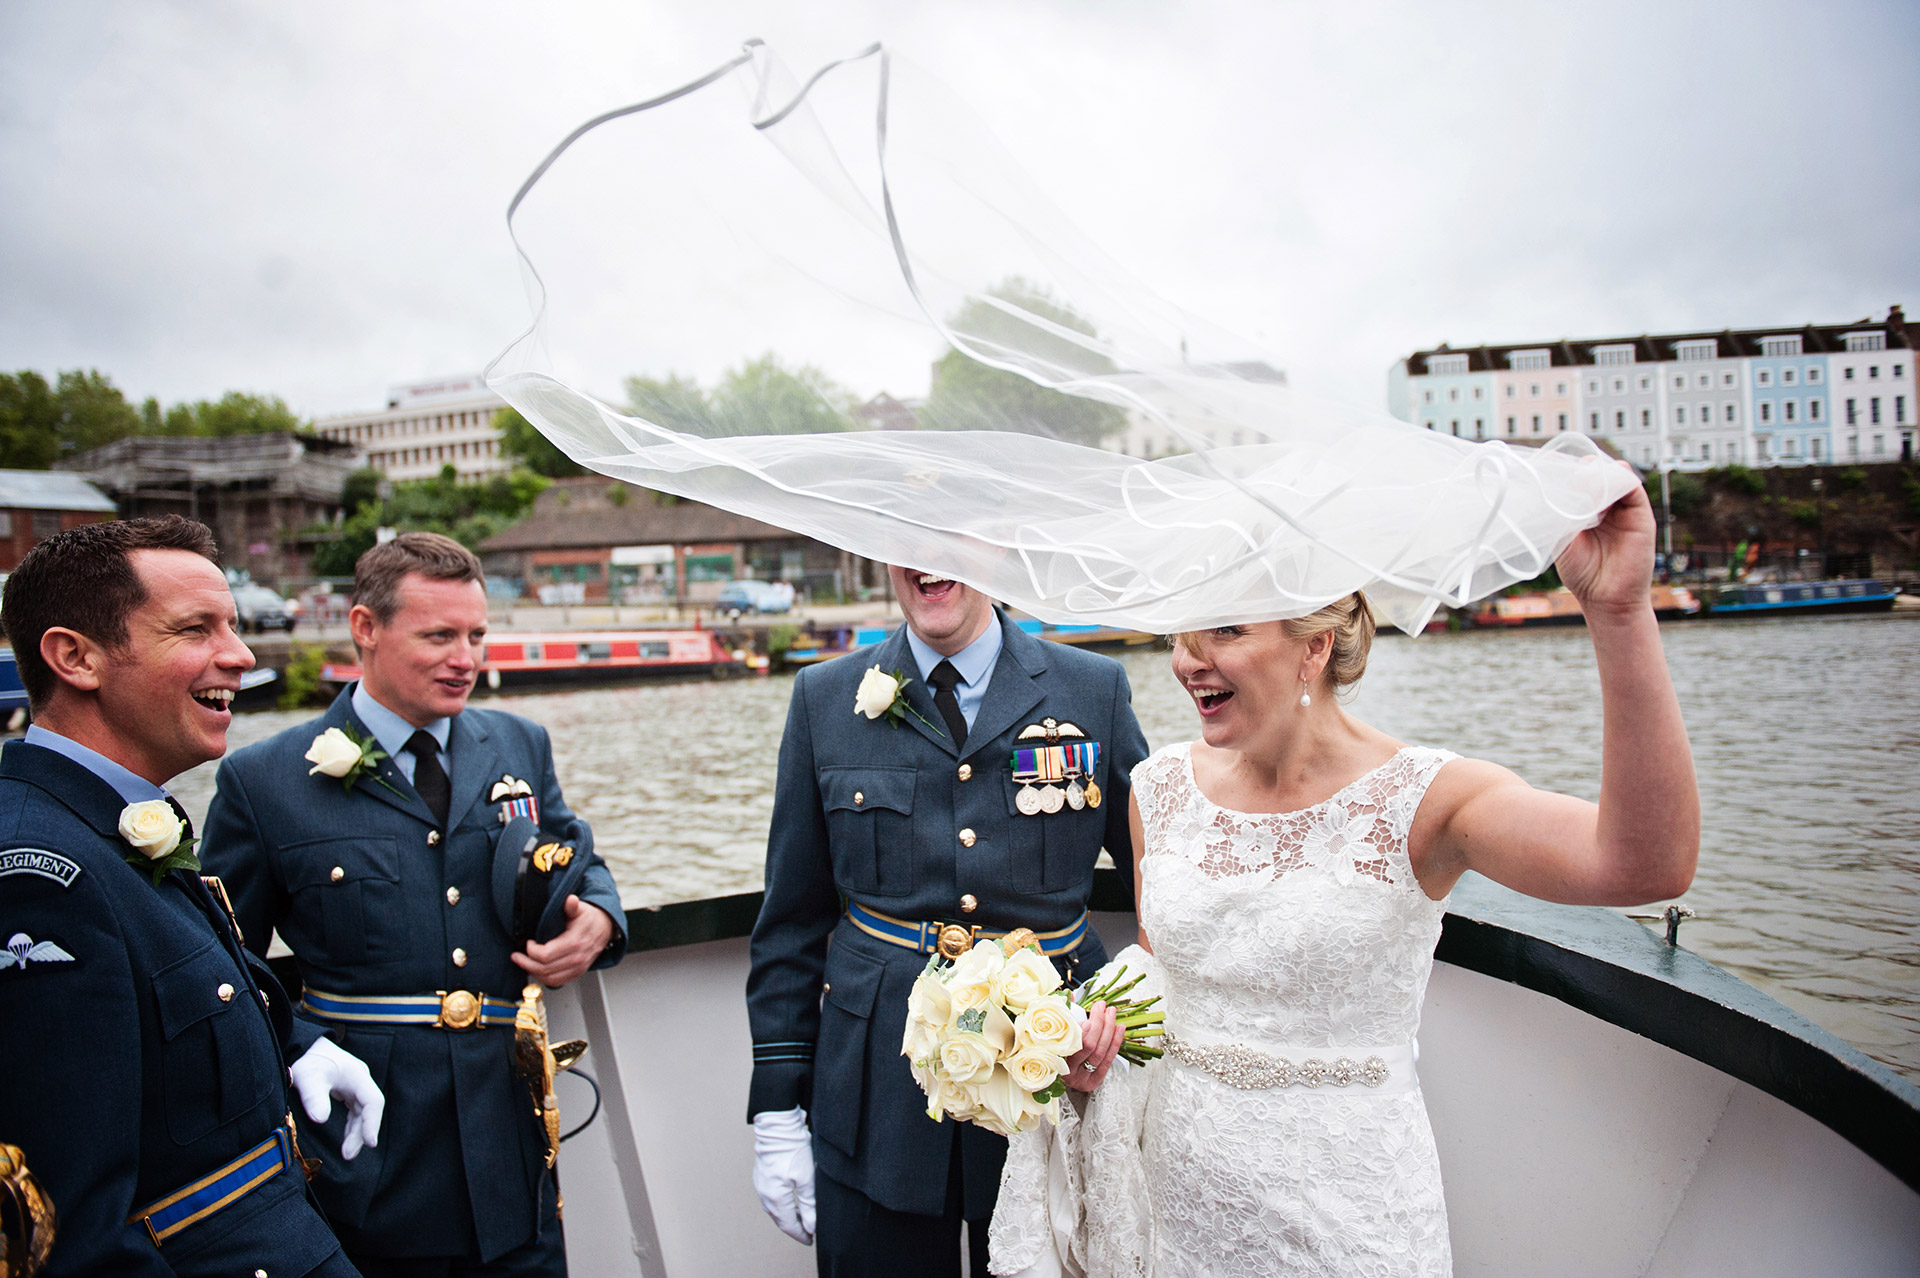 Bride with her veil being caught by the wind. Bride and groom and groomsmen on a boat in Bristol. Groomsmen wearing UK military uniform. Everyone laughing.